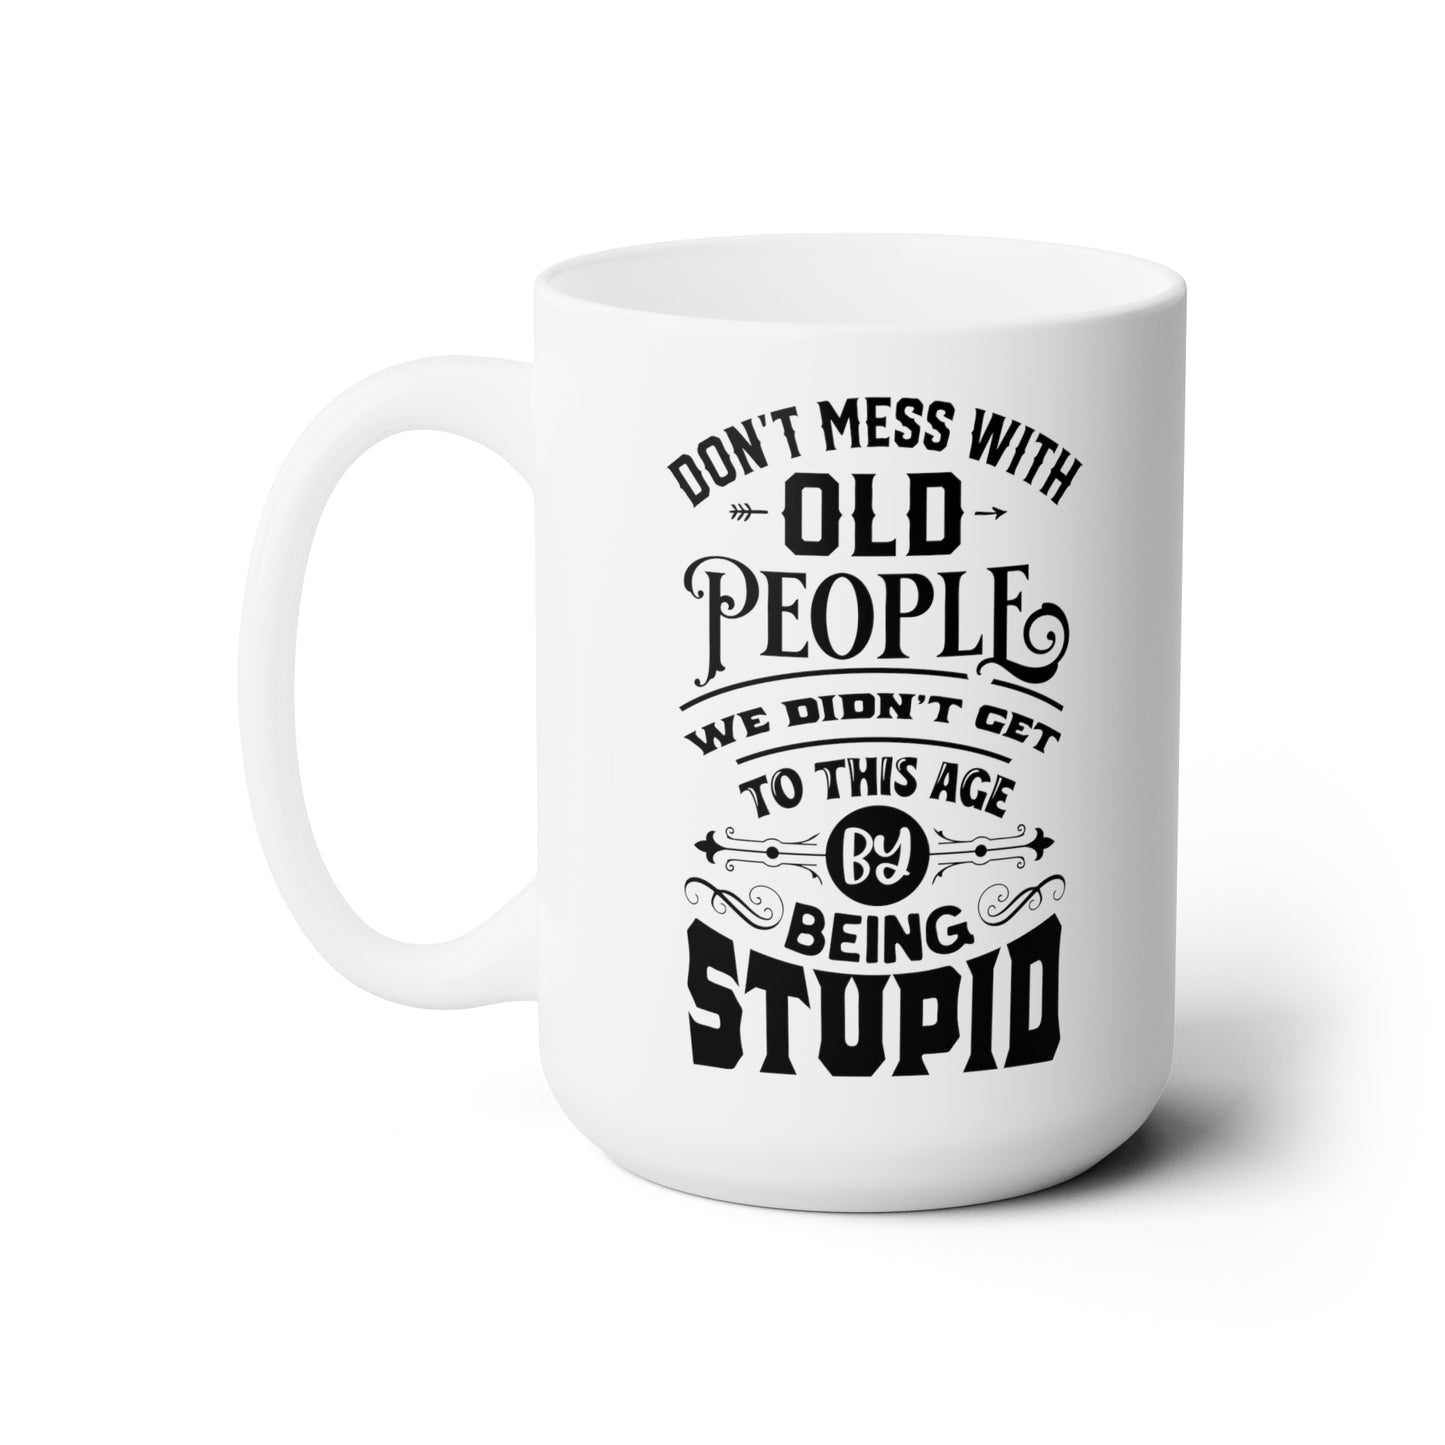 Old People Ceramic Mug For Aging Coffee Cup For Funny Sarcastic Birthday Gift